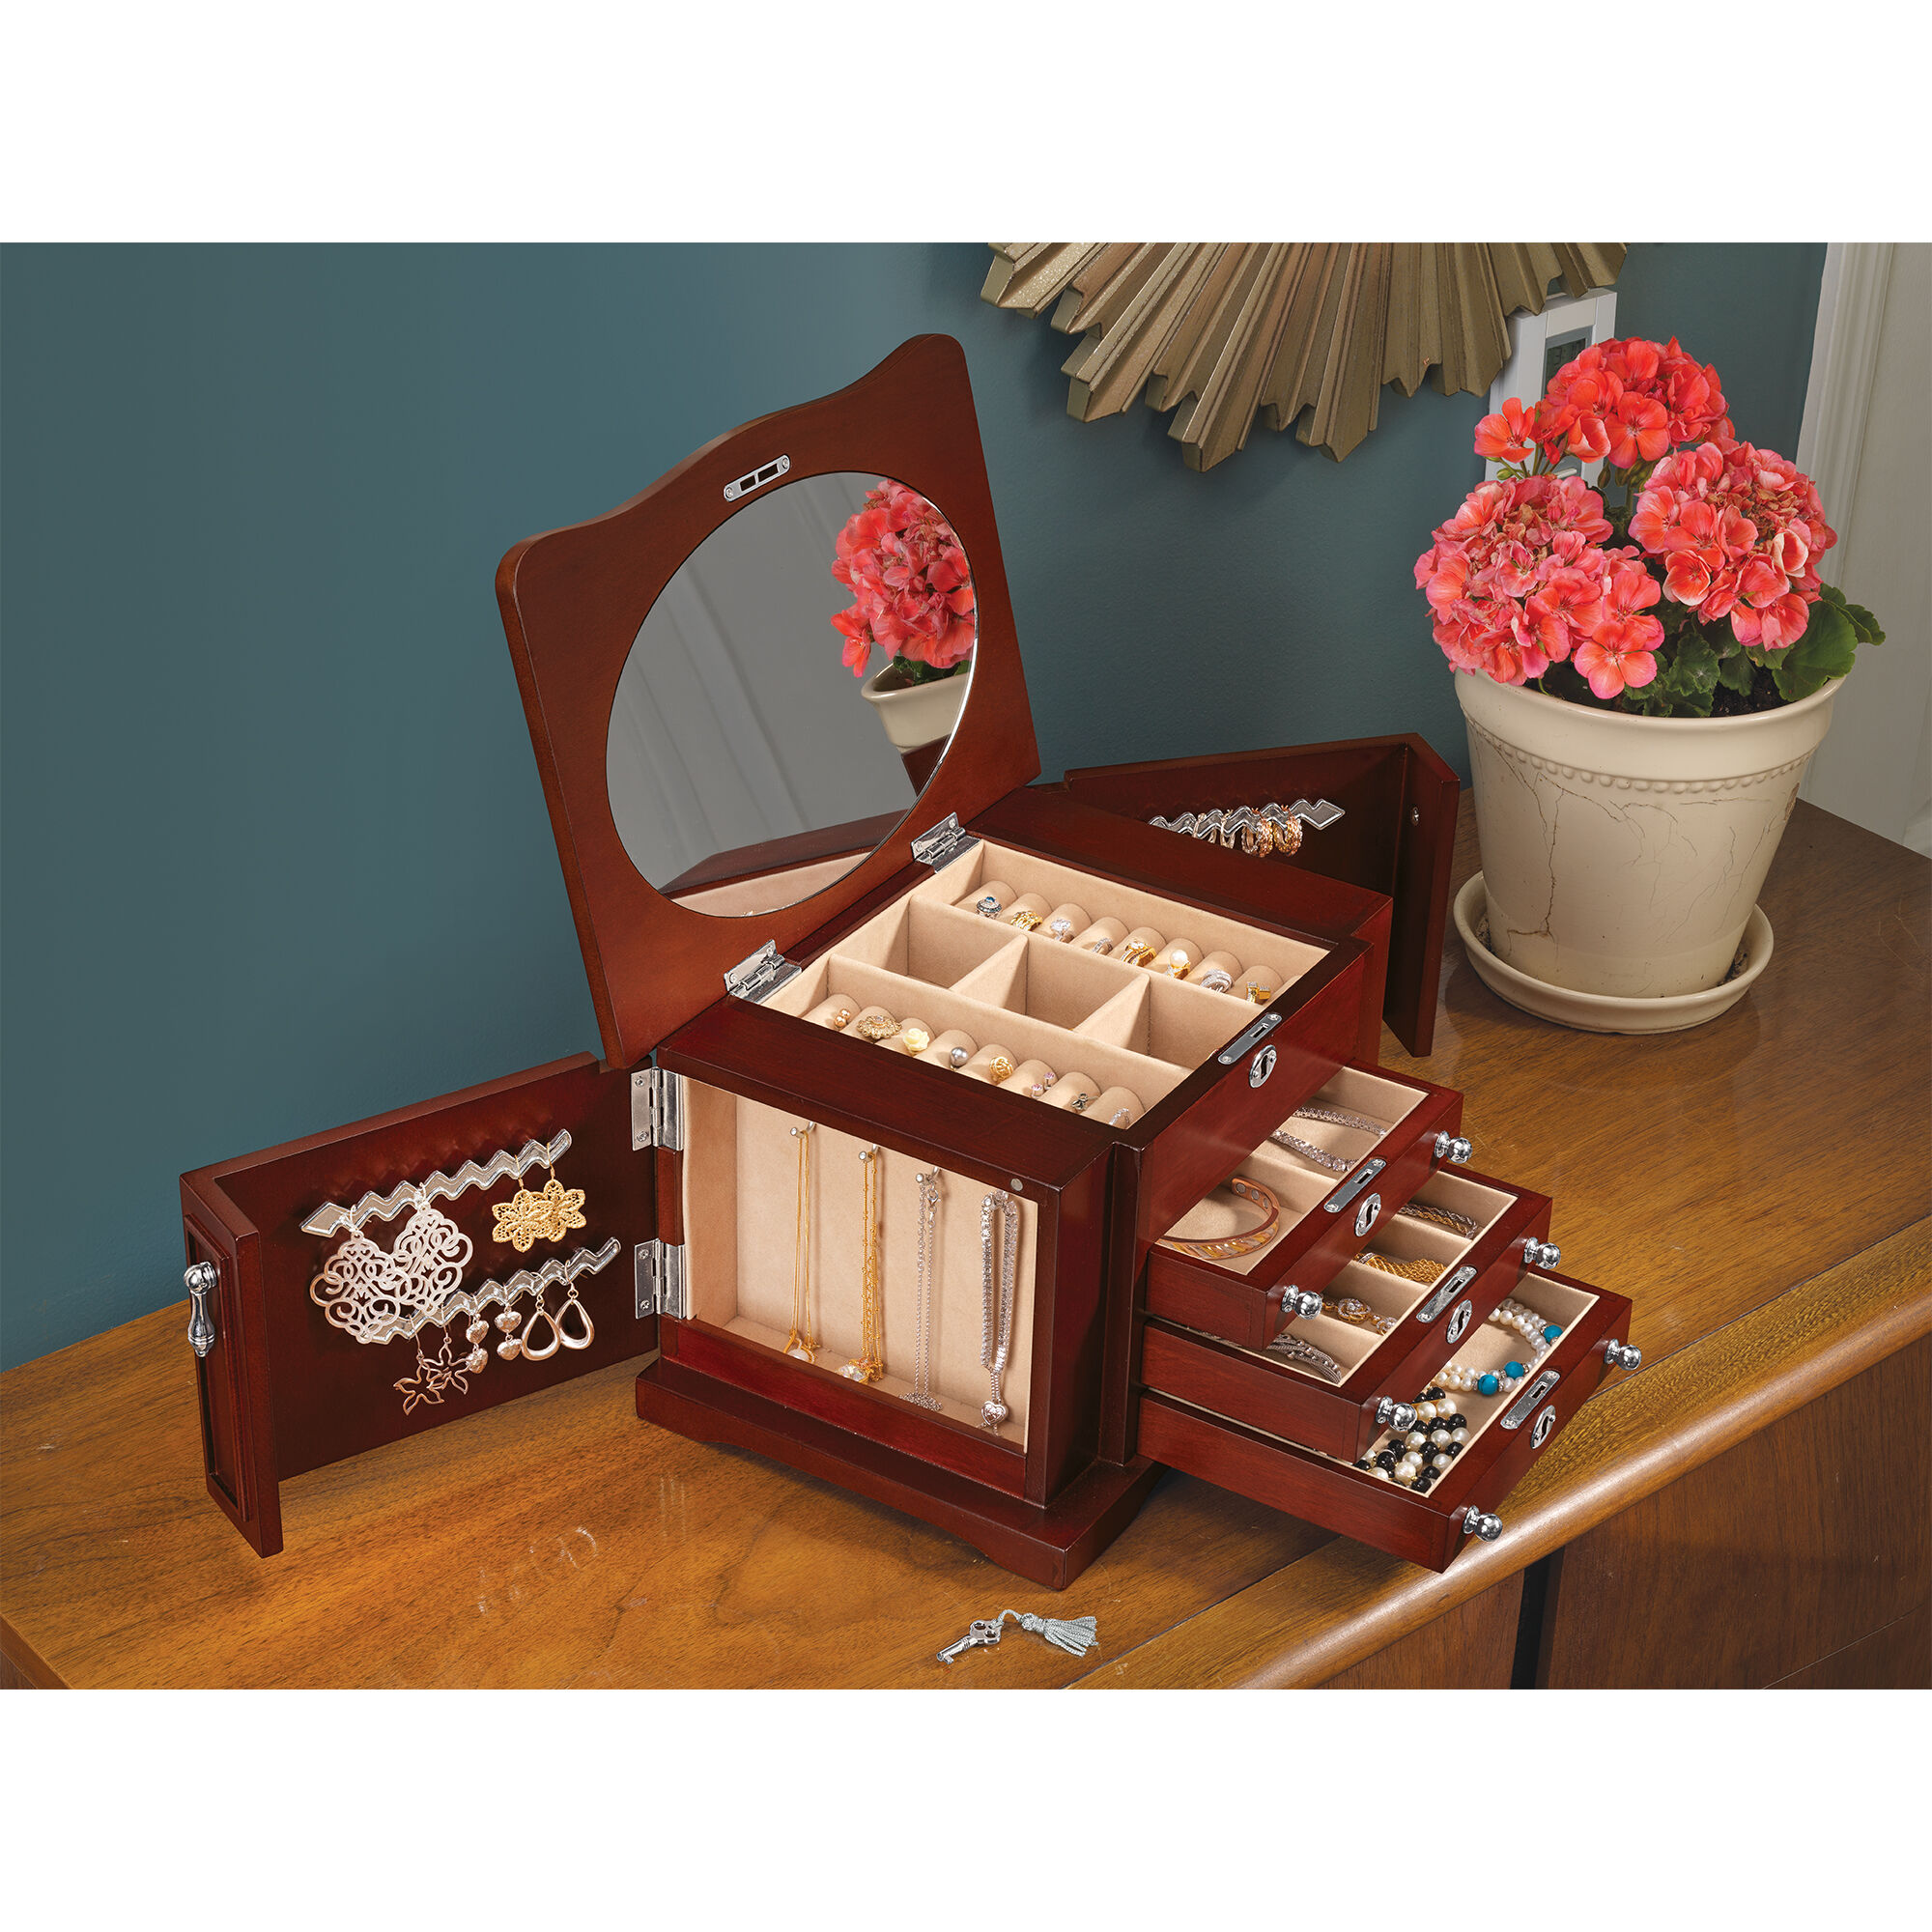 The Personalized Ultimate Jewelry Box 5665 0013 k openbkg2